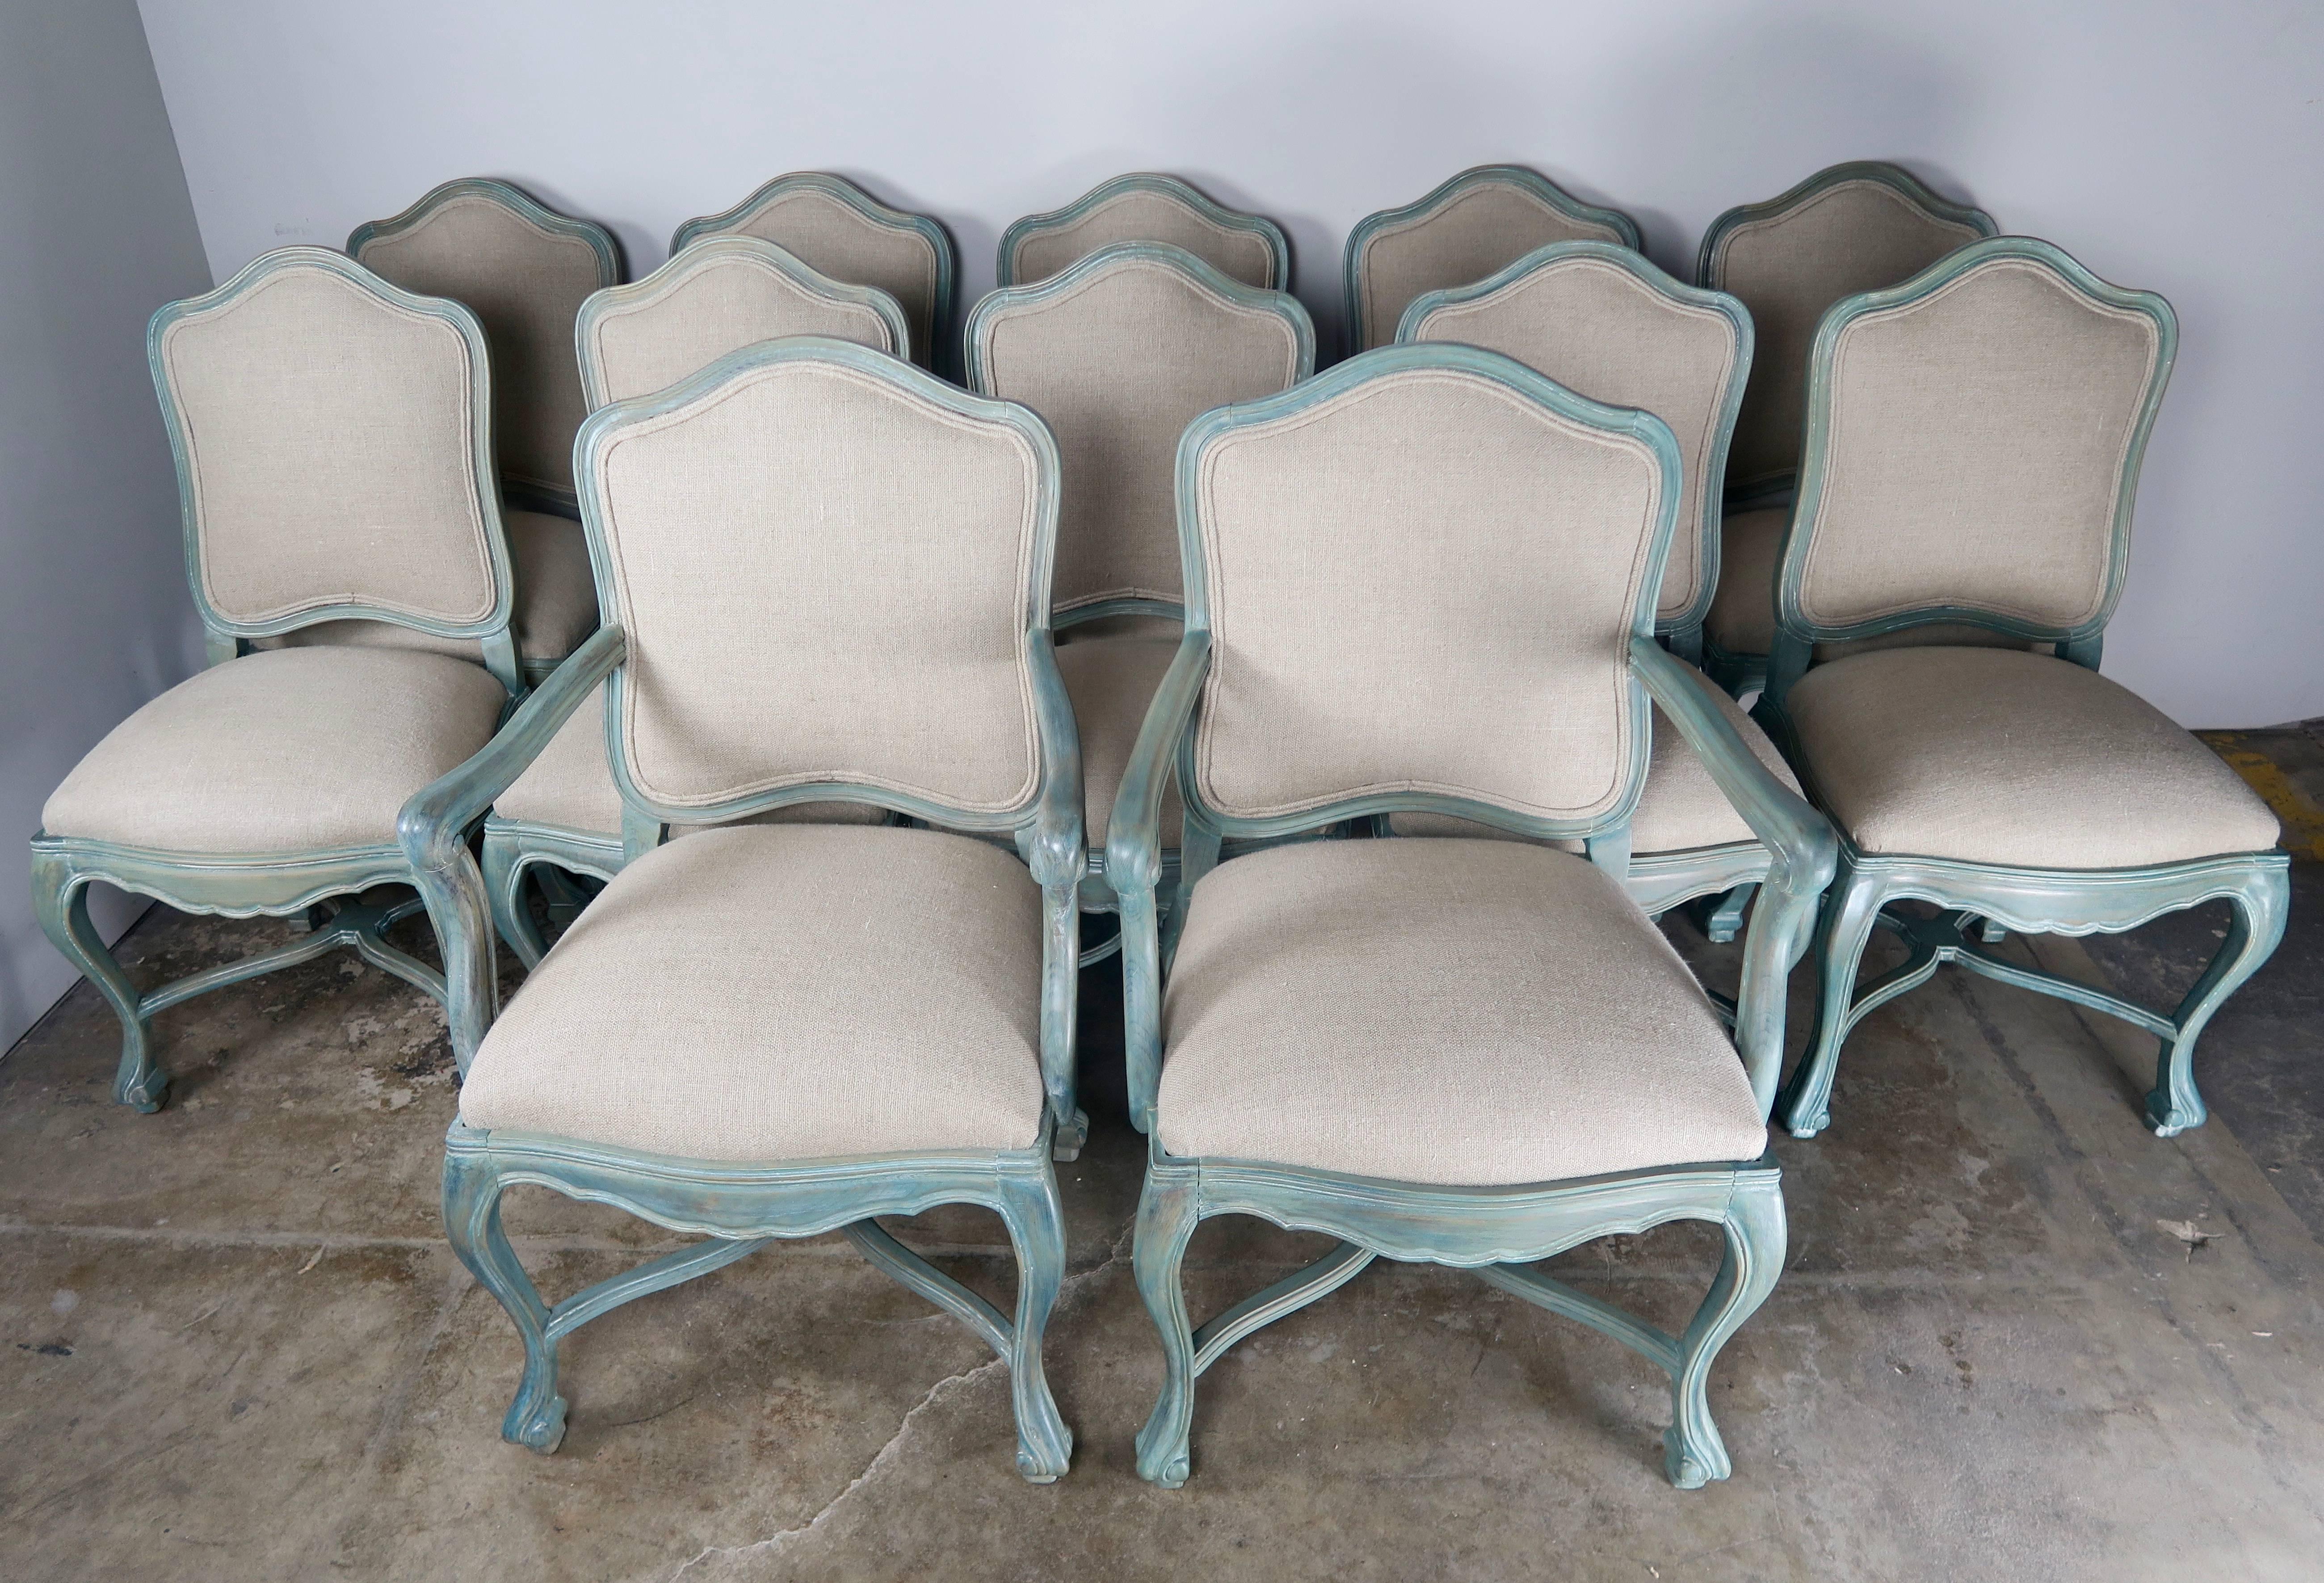 Set of 8 French Louis XV style aqua colored painted dining chairs newly upholstered in Belgium linen with double cord detail. The chairs Stand on four cabriole legs that are connected by a bottom stretcher.
Size armchair: 25